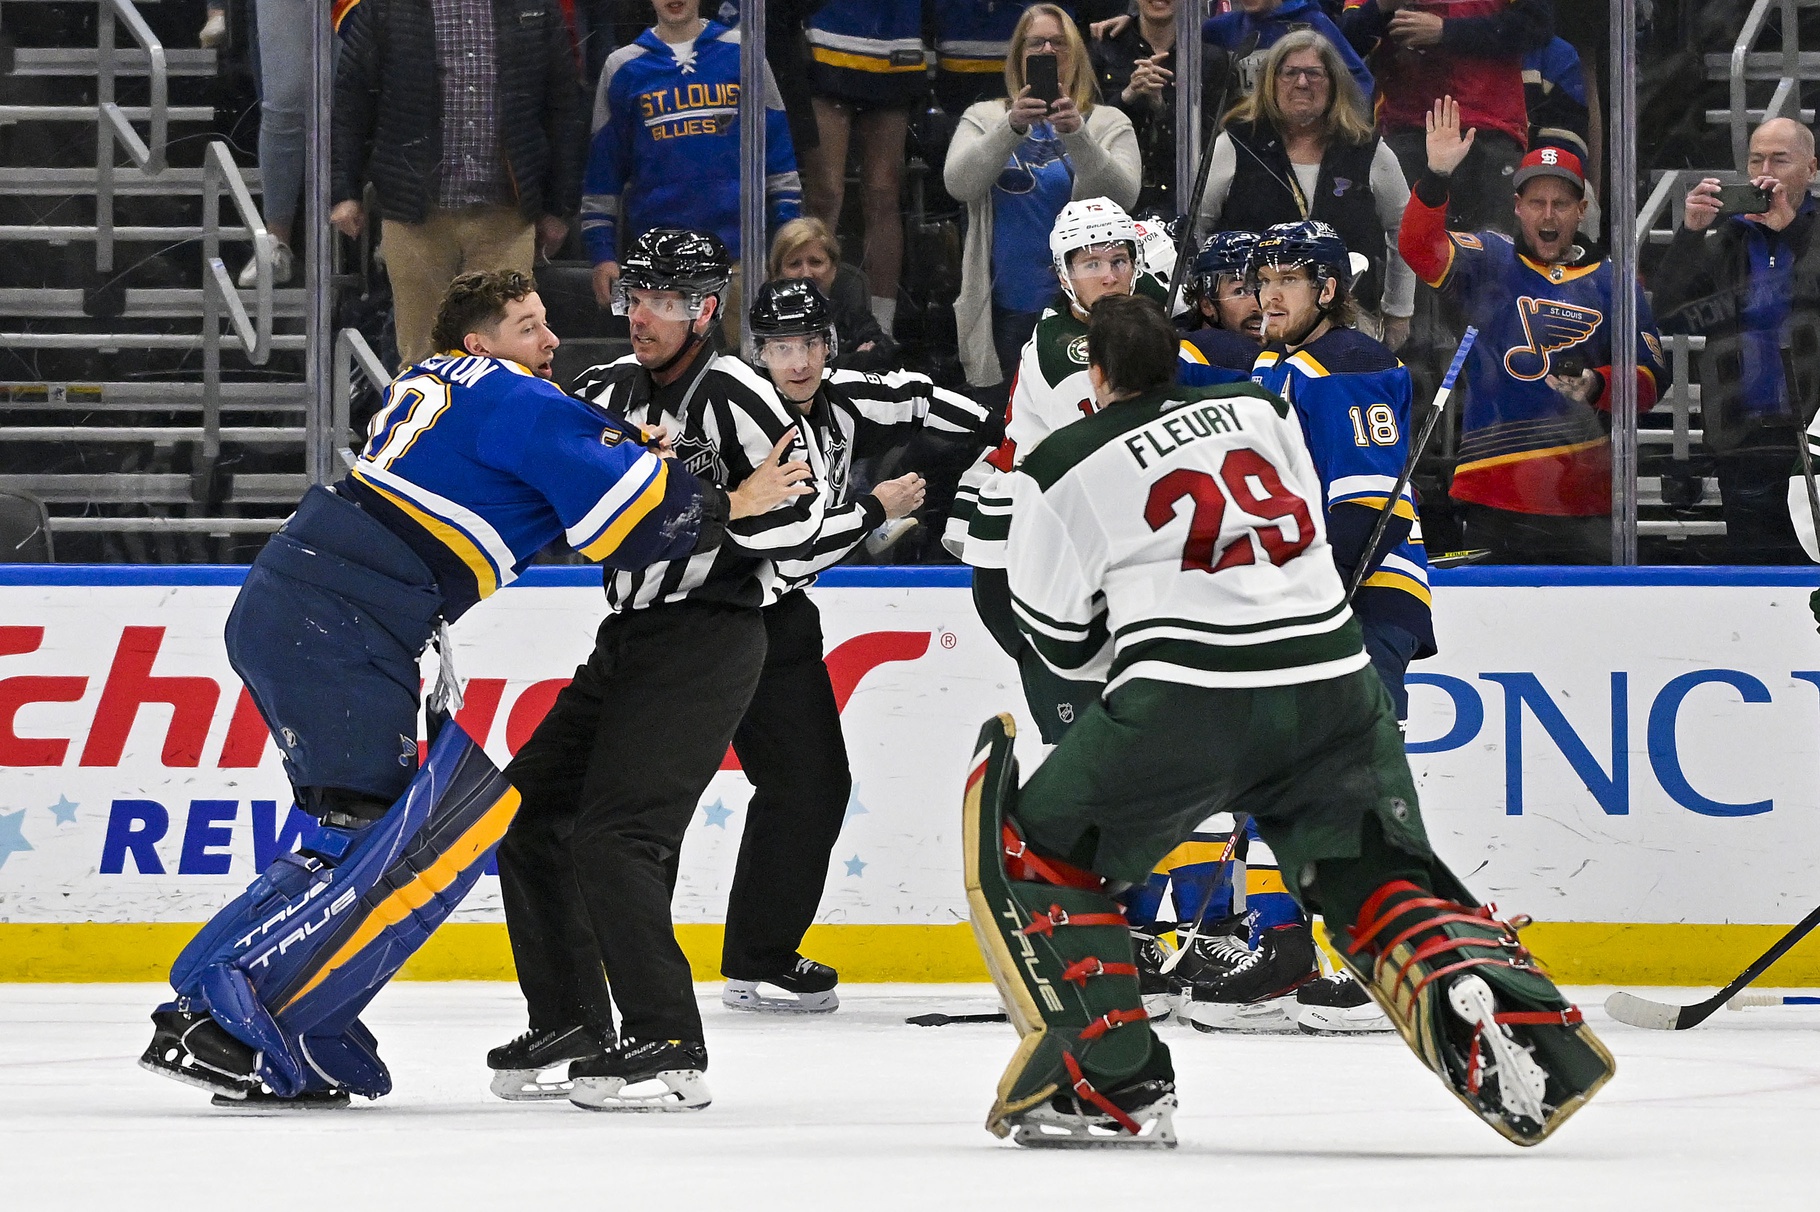 Minnesota Wild - Staying in the fight with Minnesota Hockey Fights